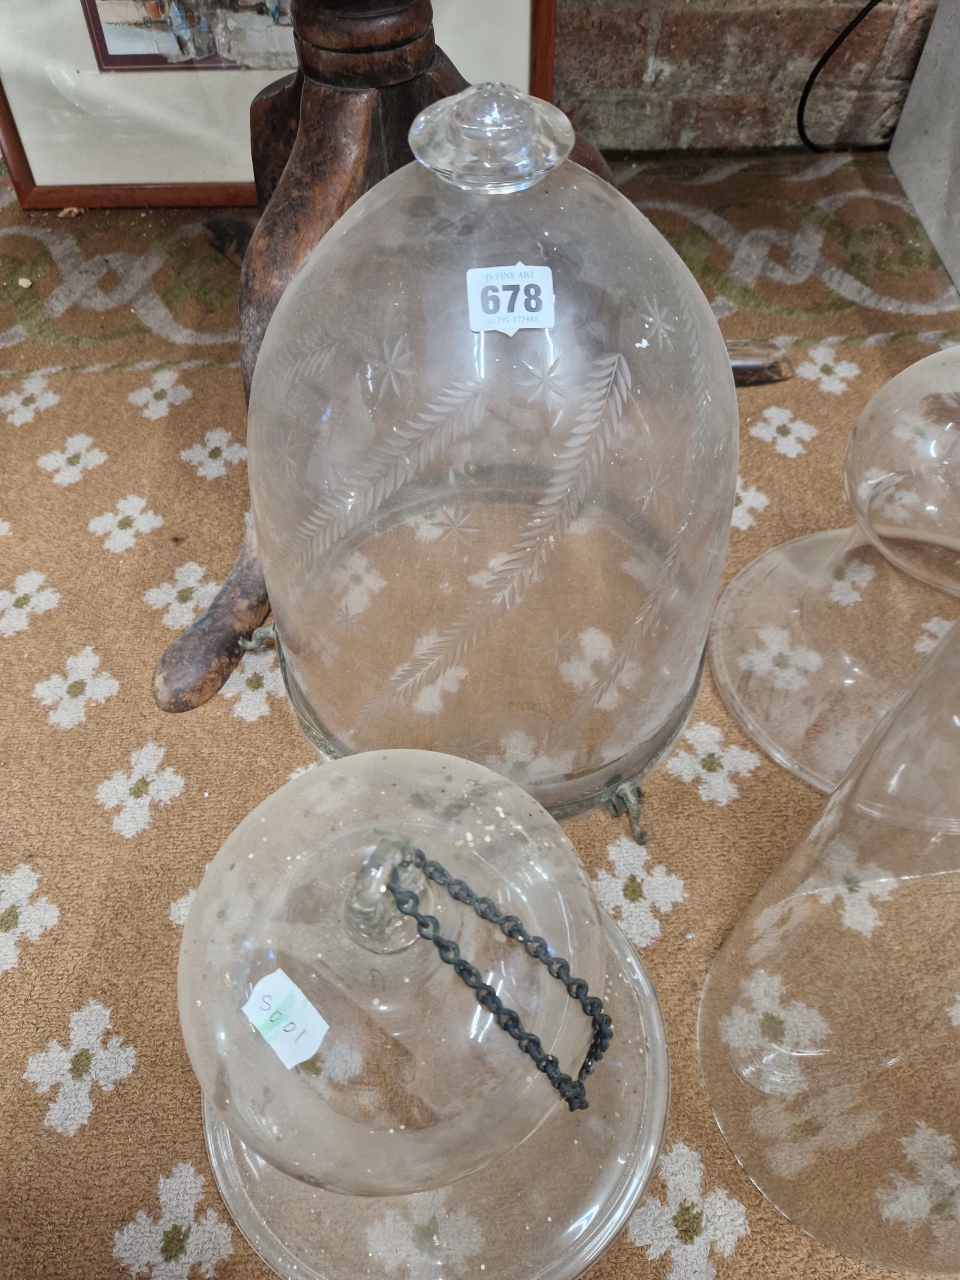 TWO CLEAR GLASS BELL SHAPED LIGHT SHADES, TWO DOME SHAPED CEILING BOWLS TOGETHER WITH A GLASS DOME - Image 2 of 3